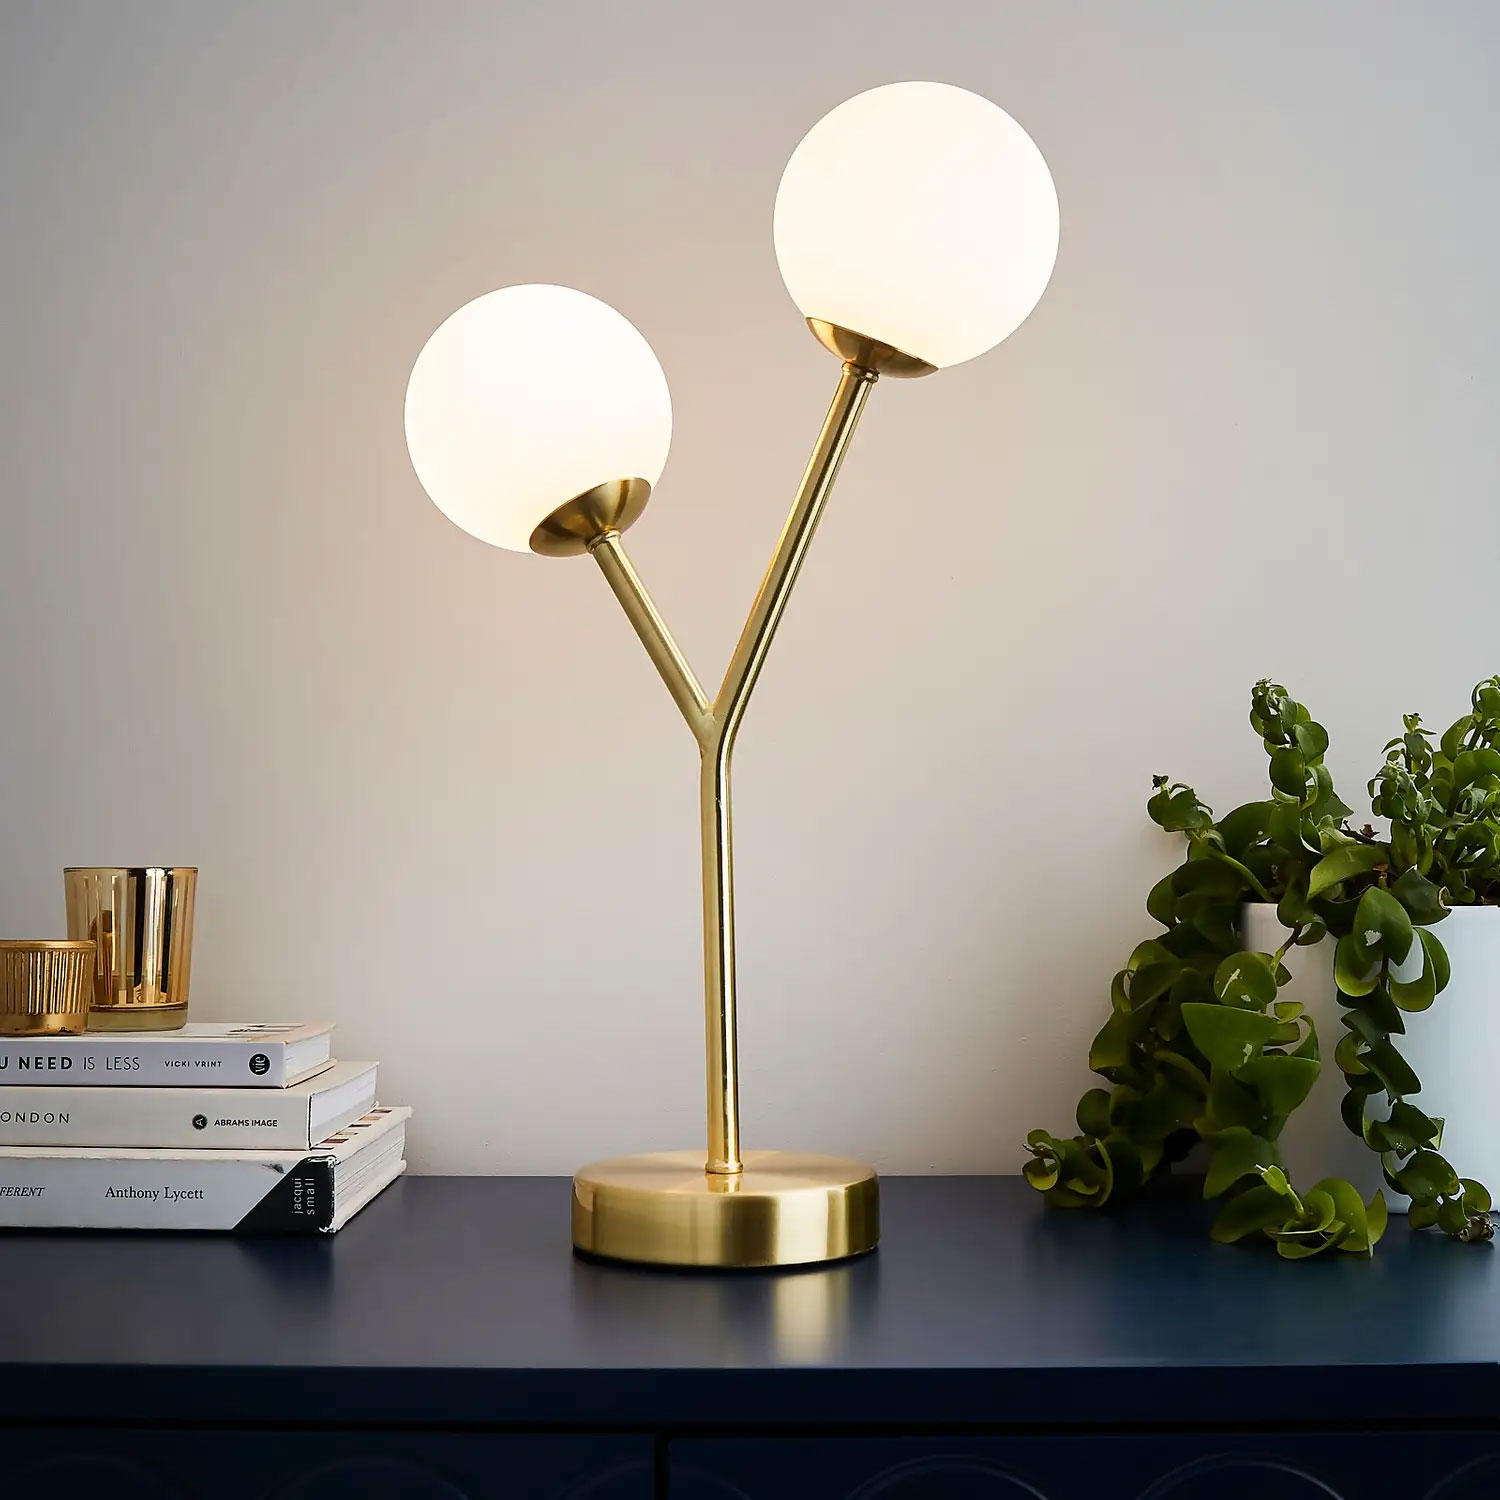 A brass and white round globe table lamp